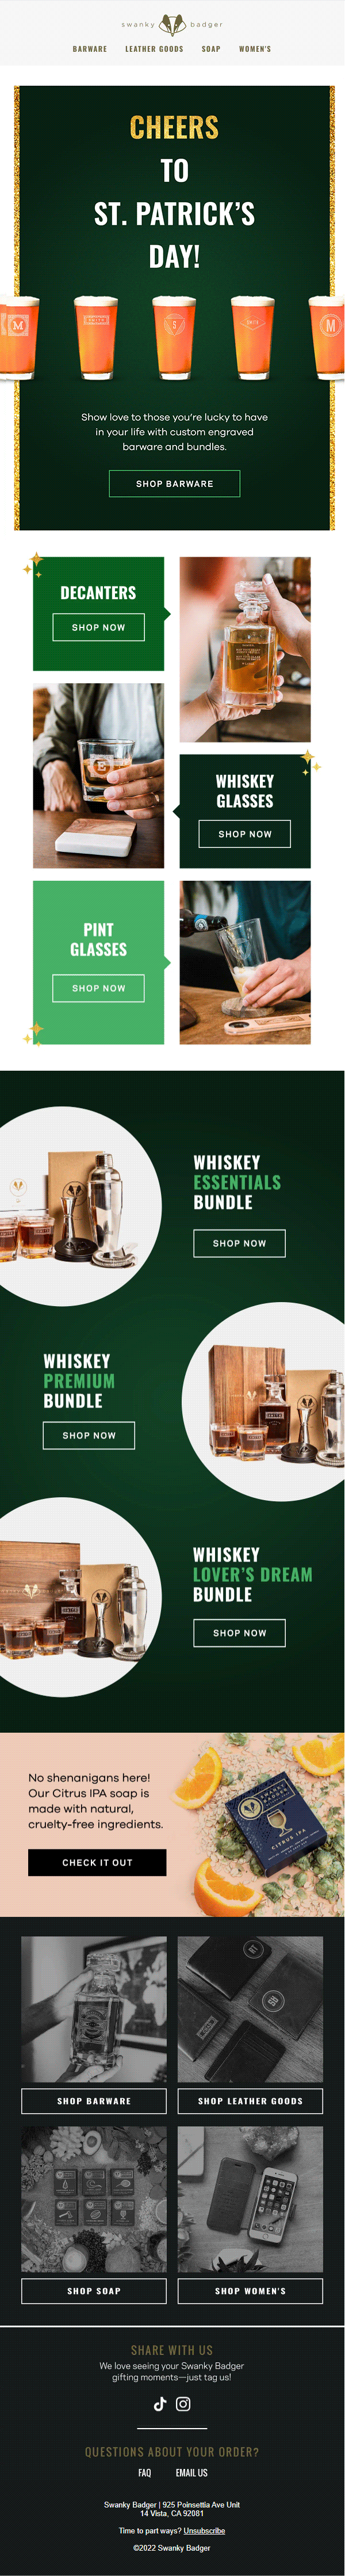 swanky badger- St. Patrick’s Day email